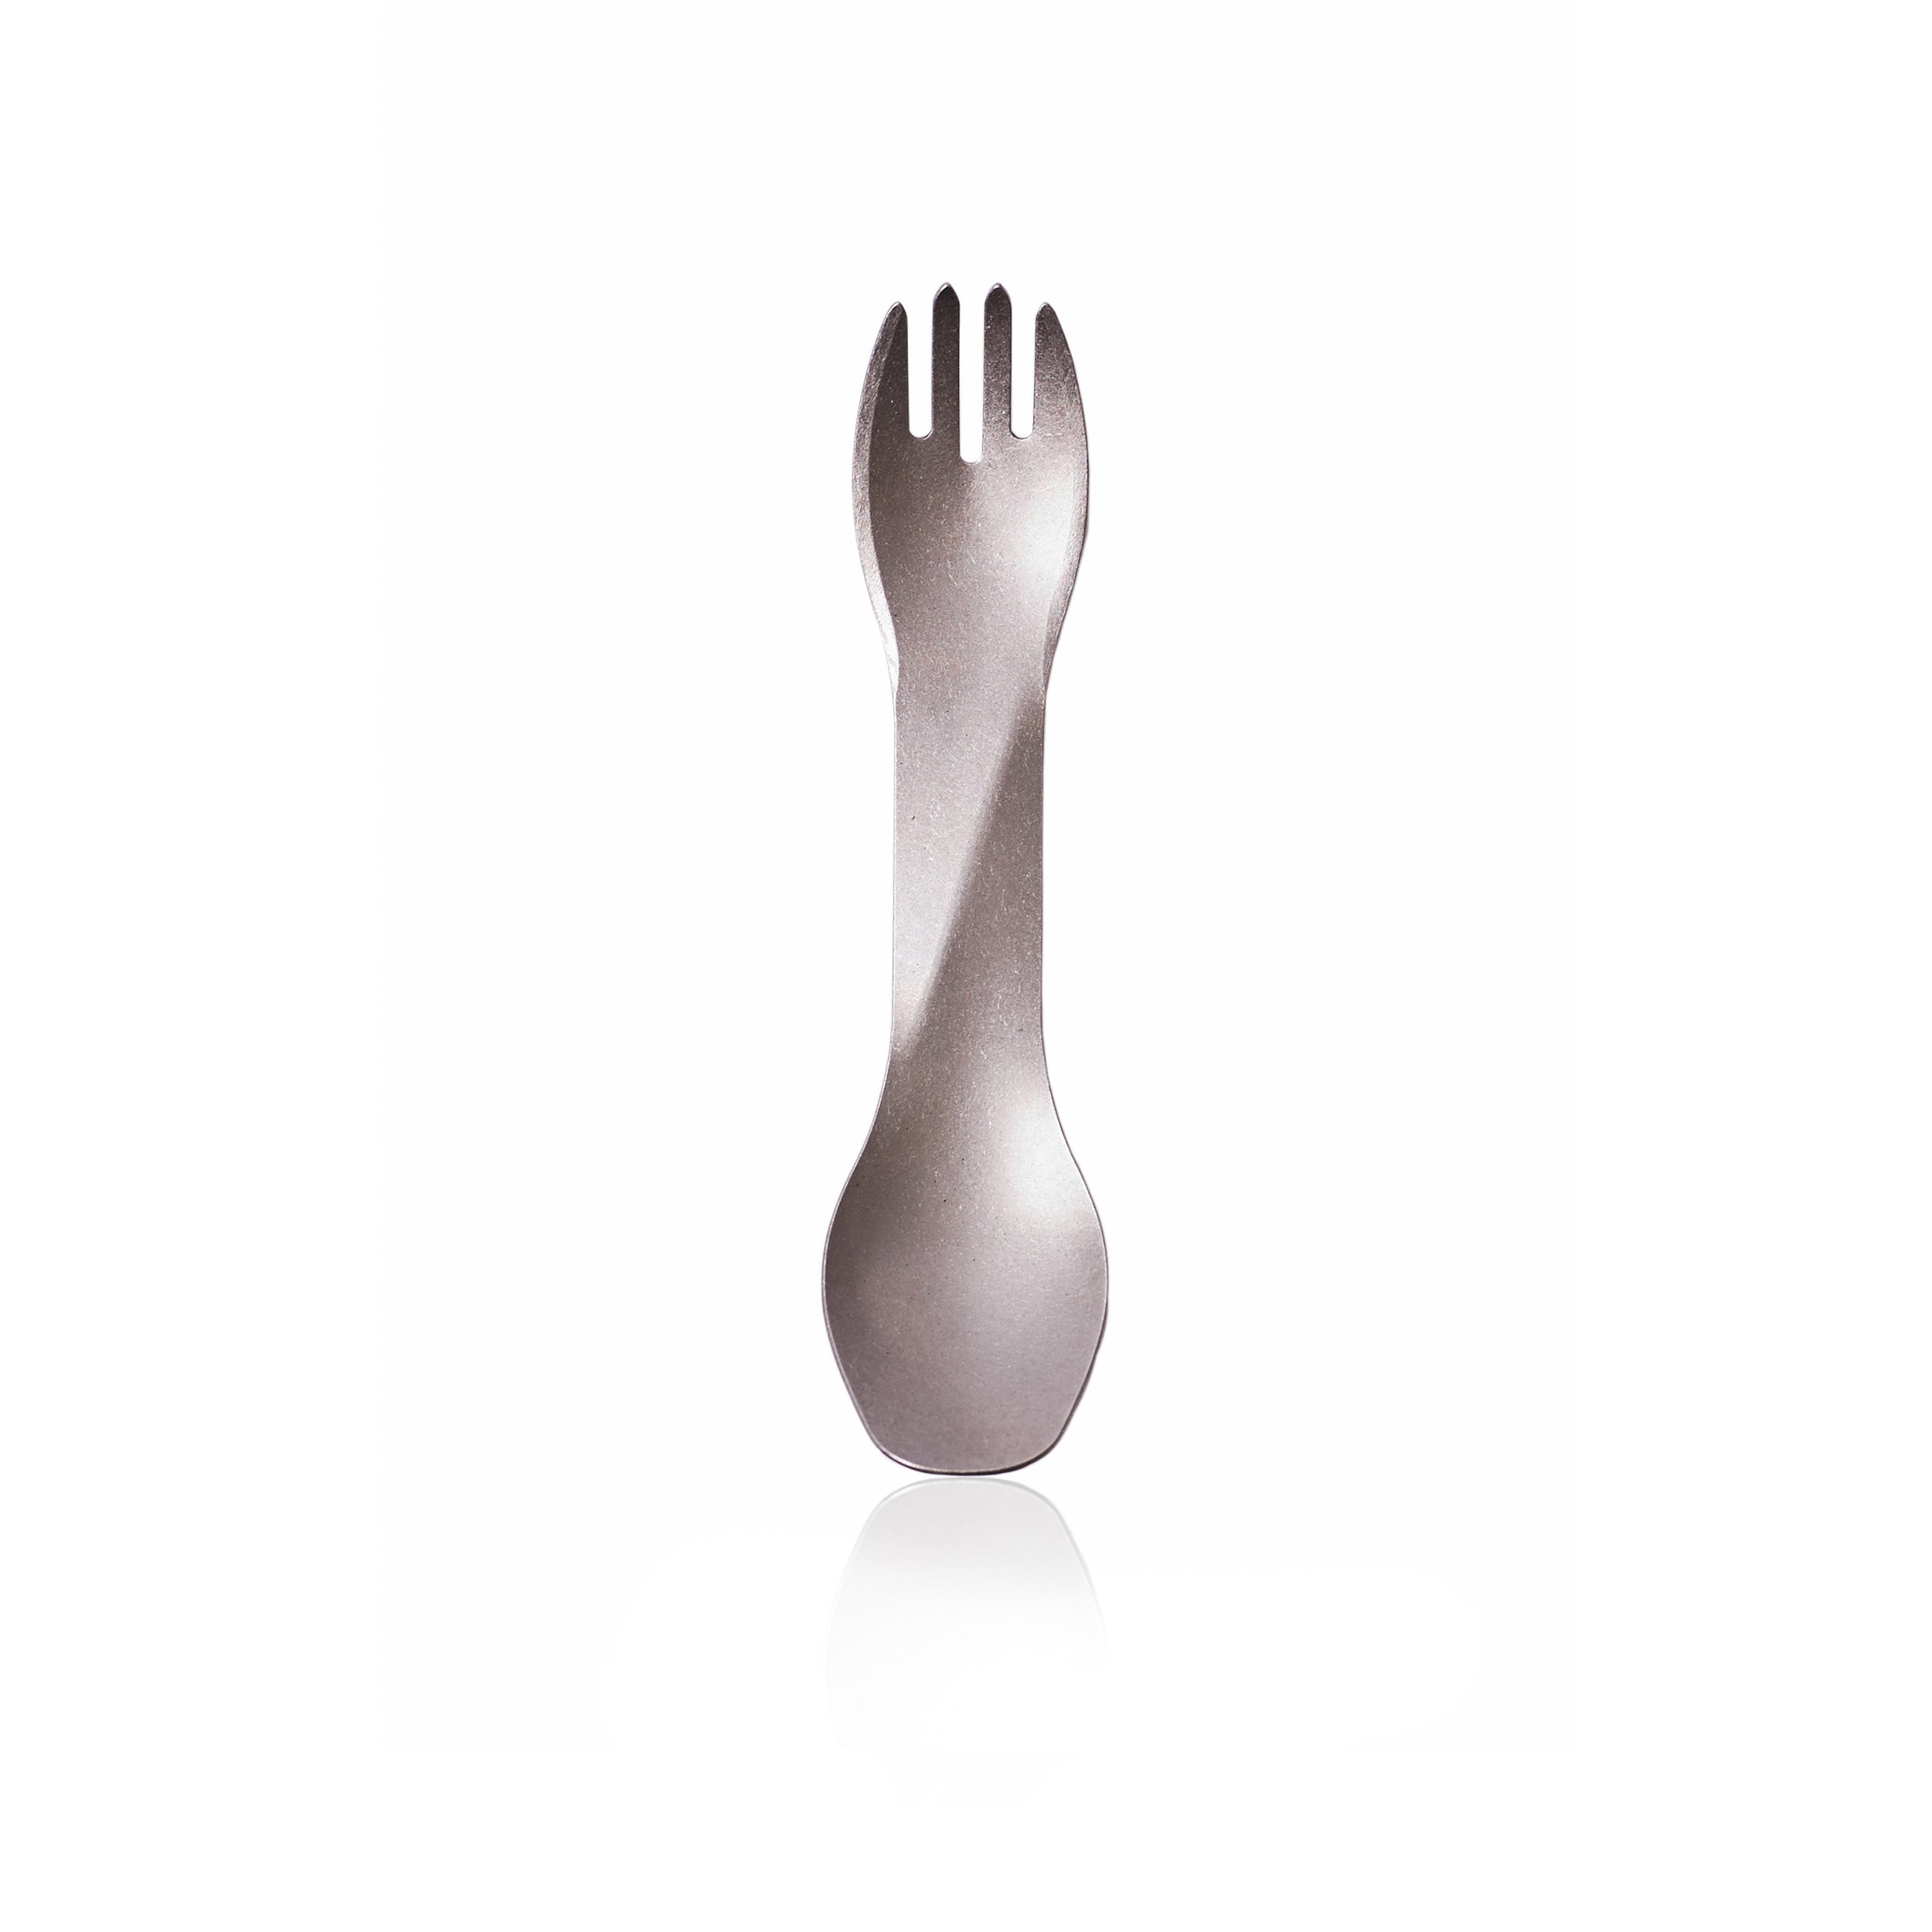 The civilized, miniature, combination fork and spoon (spork) -- the